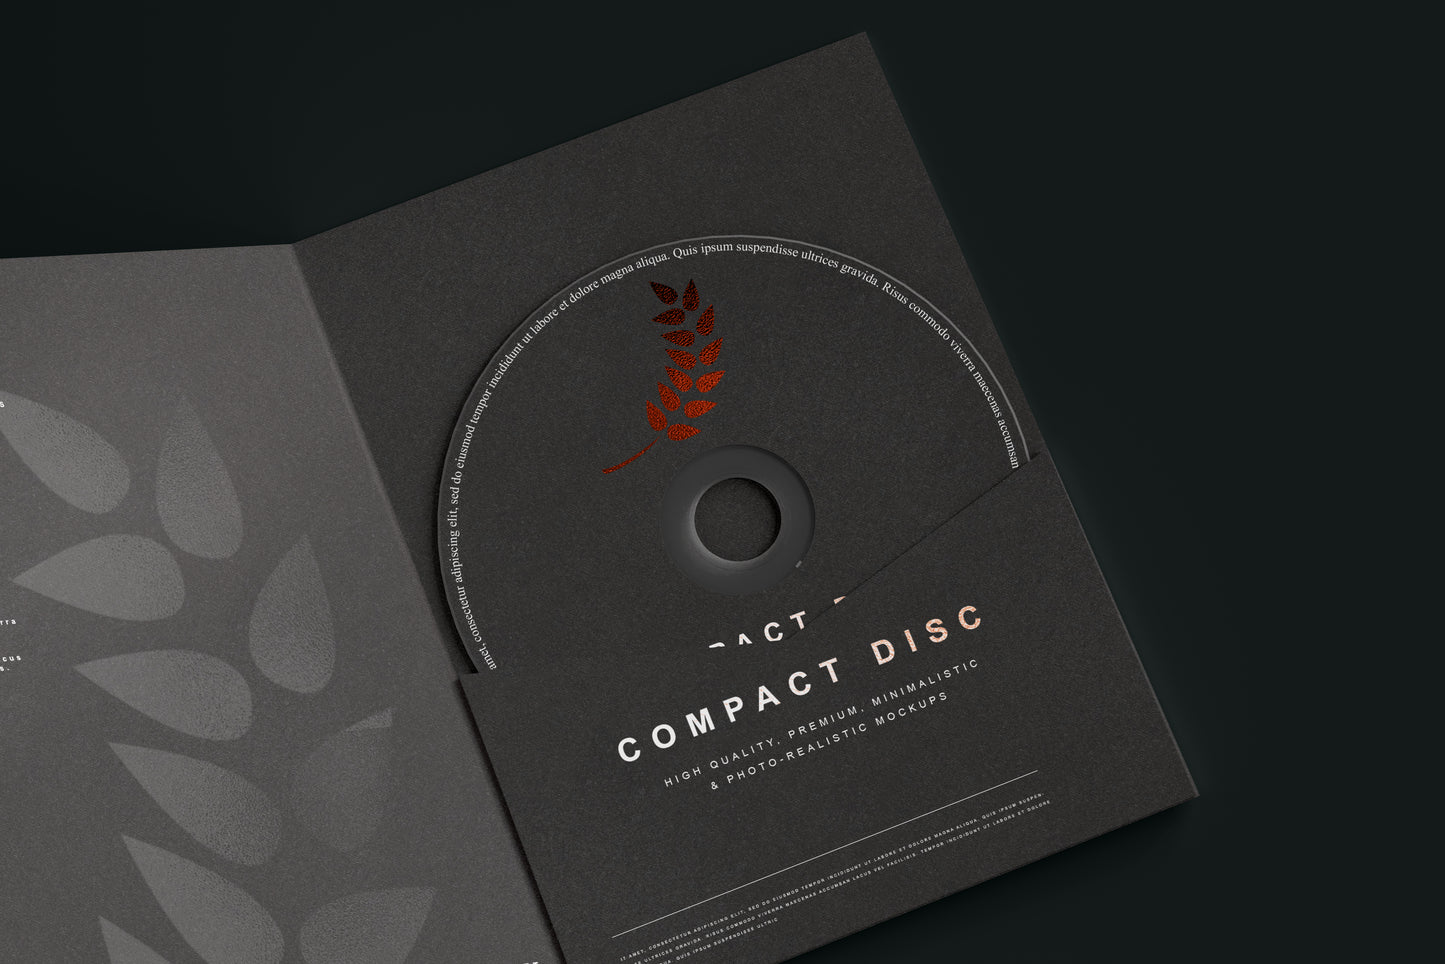 Disc and Paper Sleeve Mockups